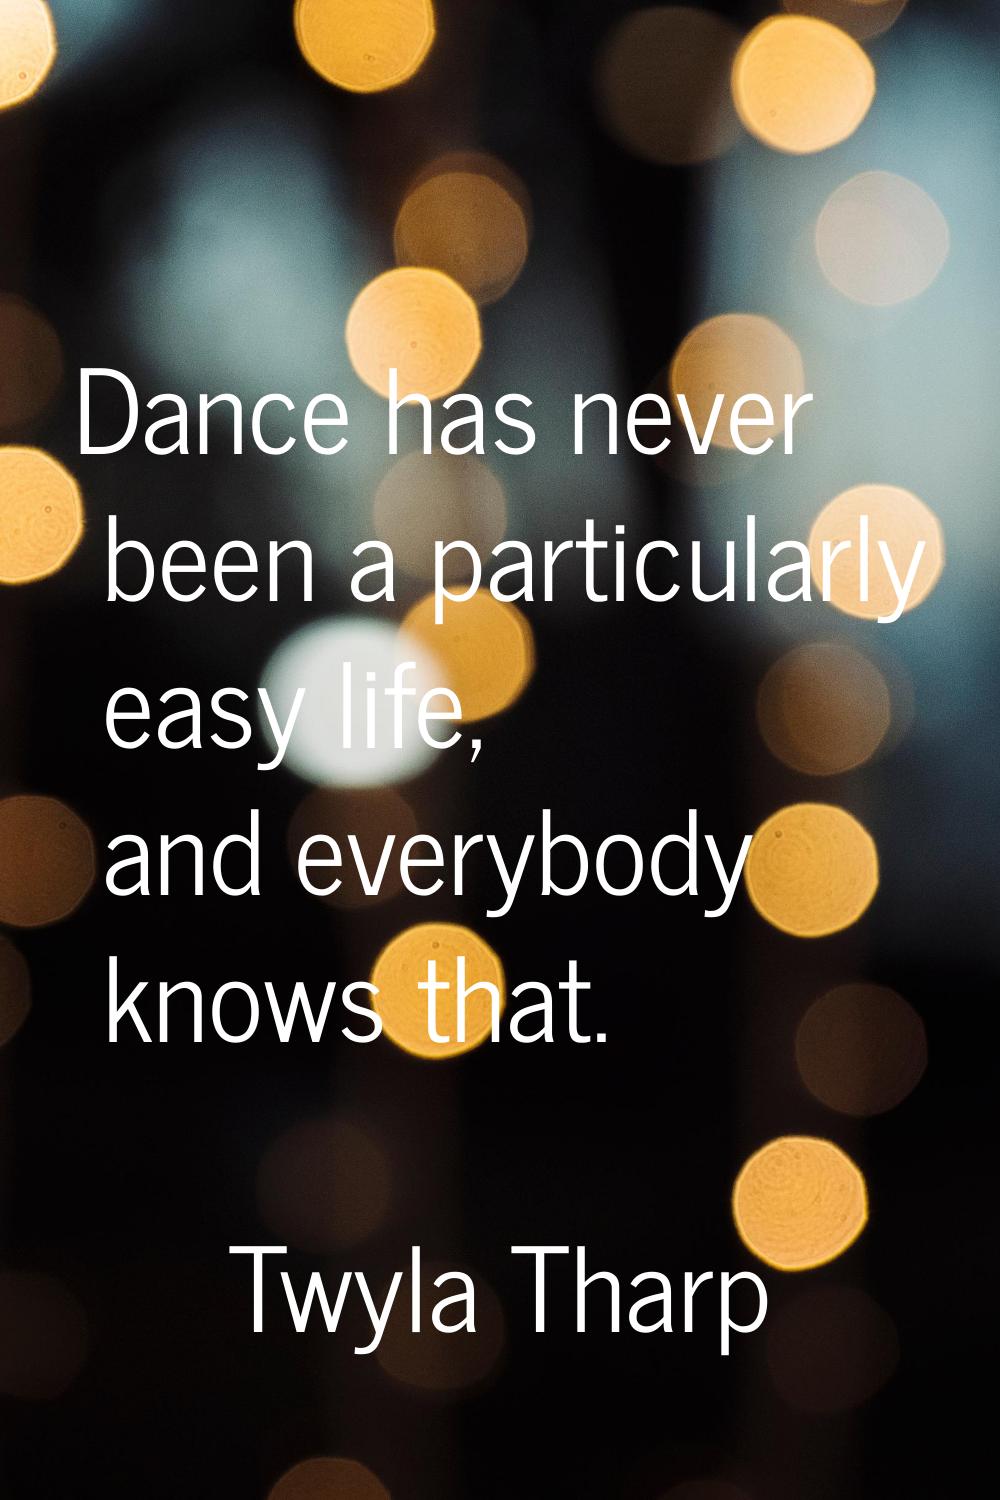 Dance has never been a particularly easy life, and everybody knows that.